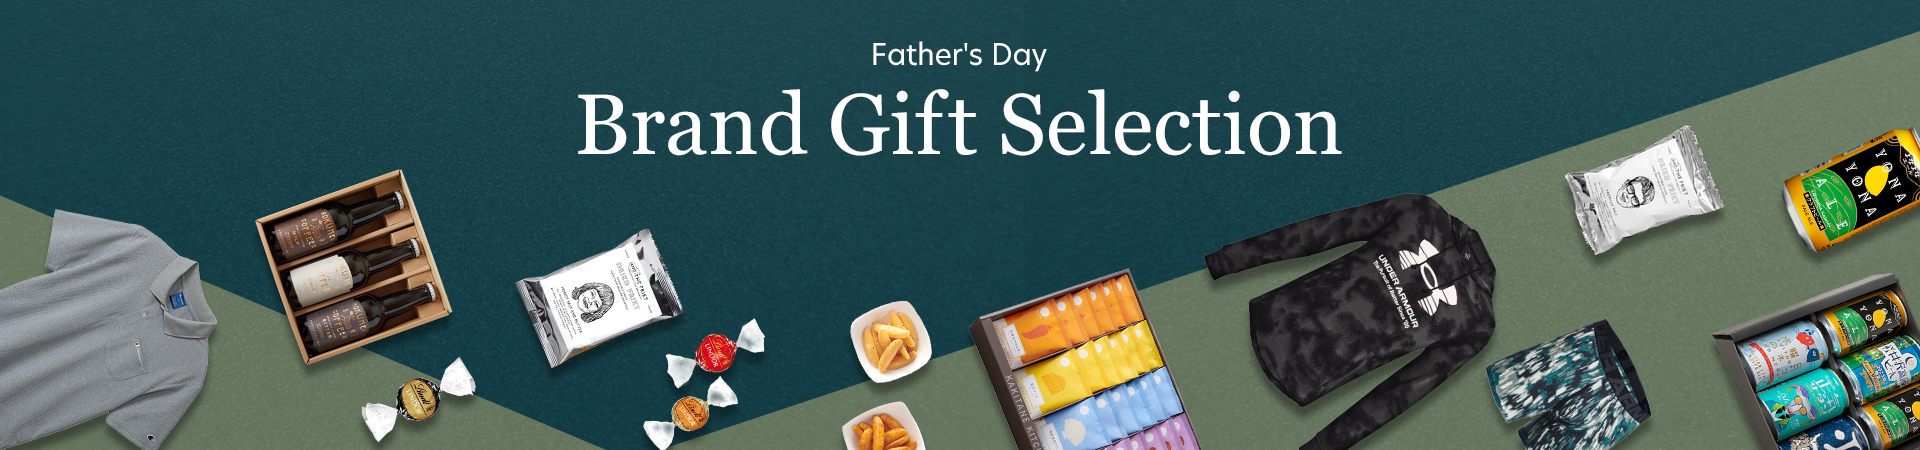 Father's day Brand Gift Selection